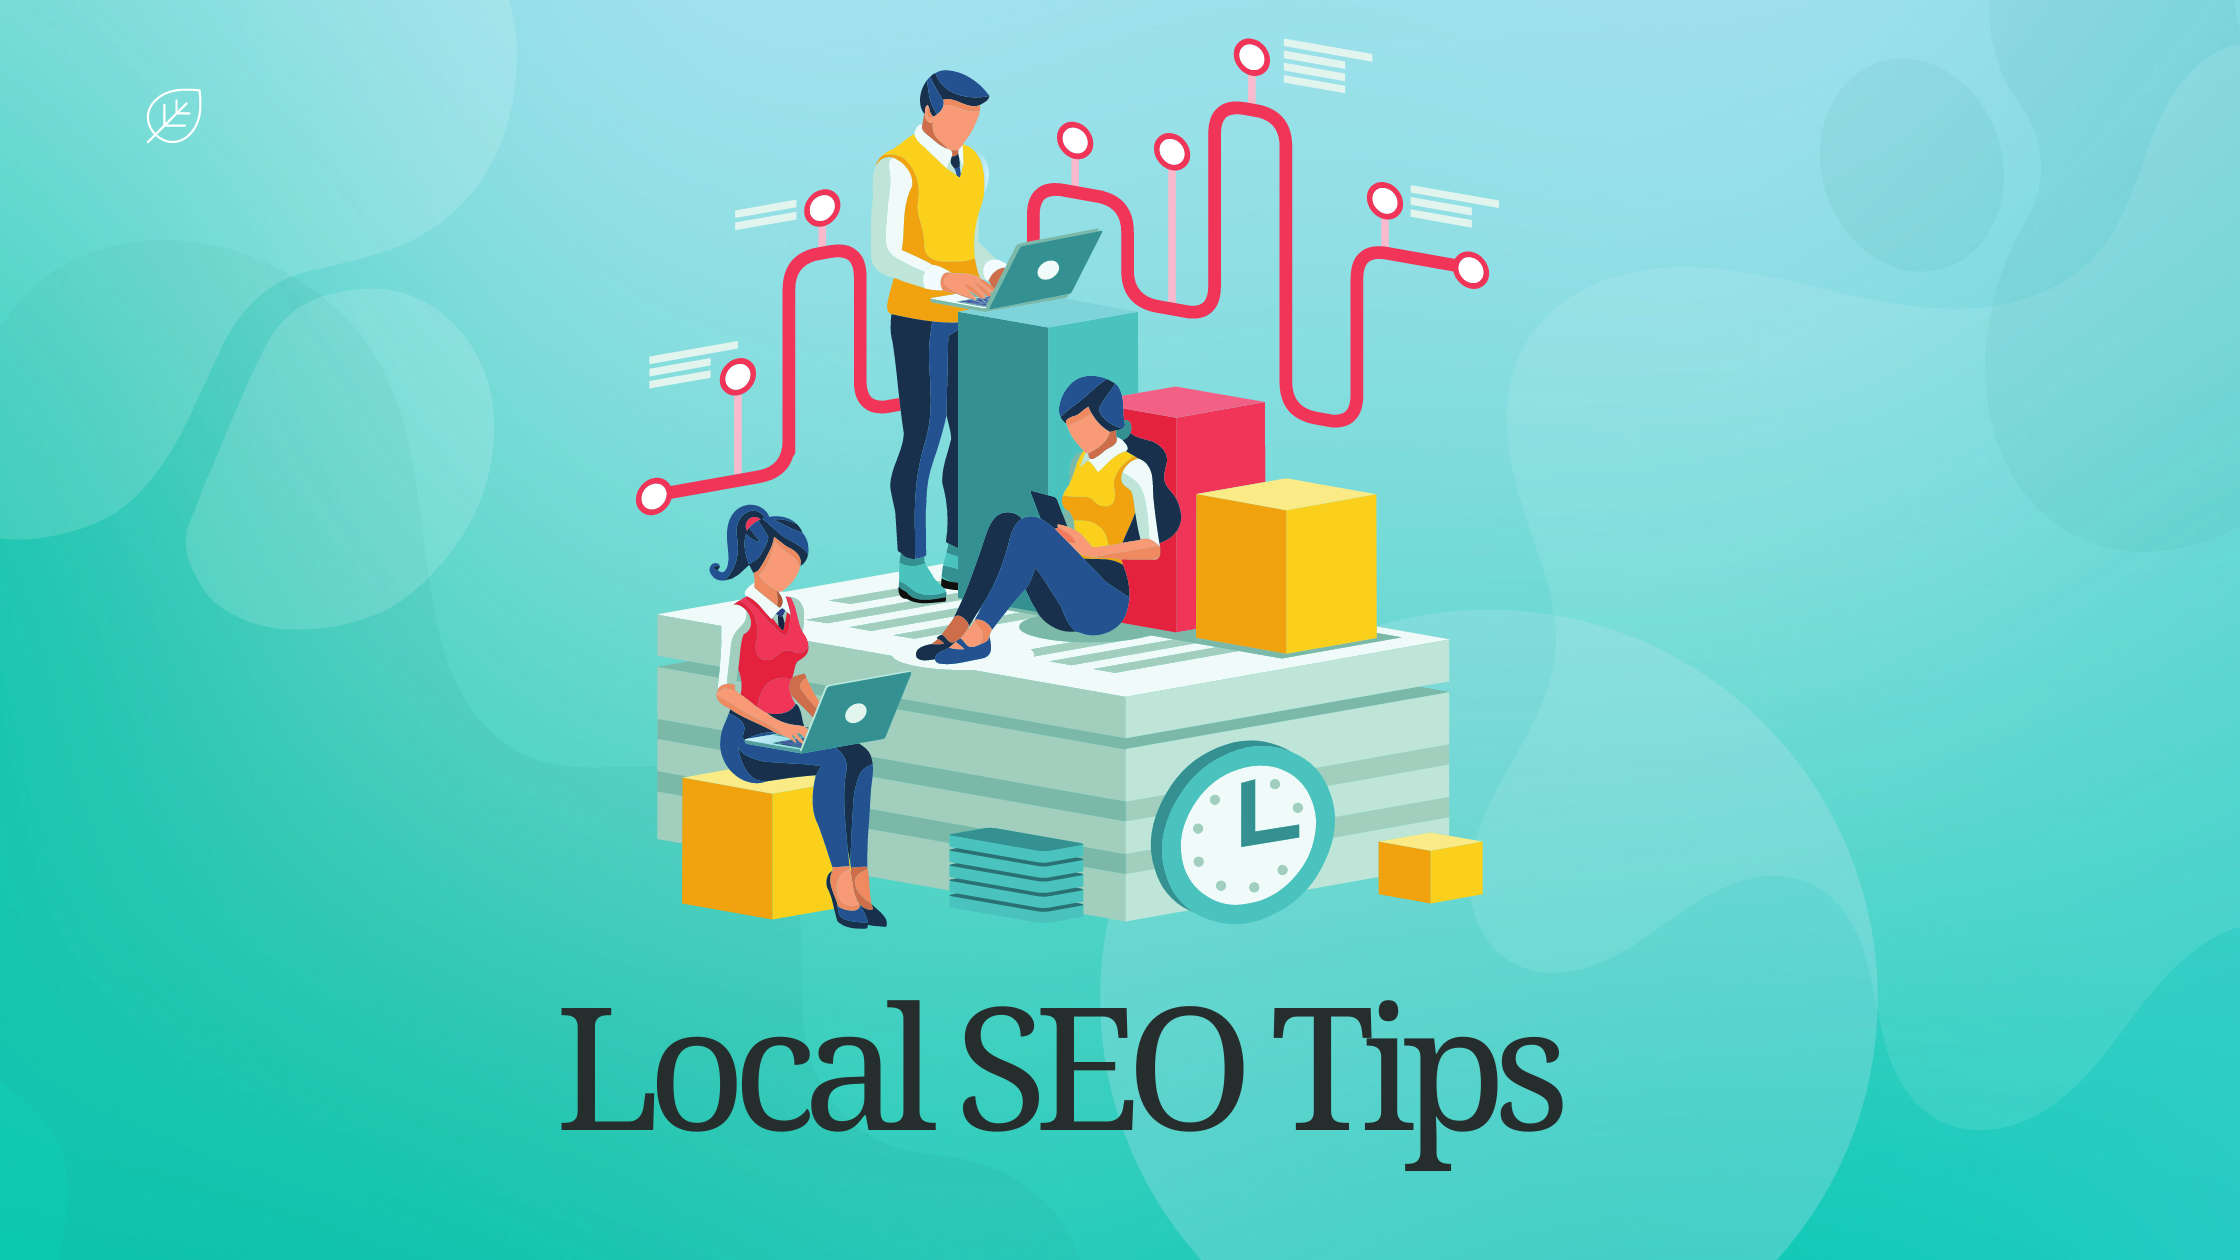 6 Local SEO Tips to Dominate Google Maps and Increase Your Site Rankings